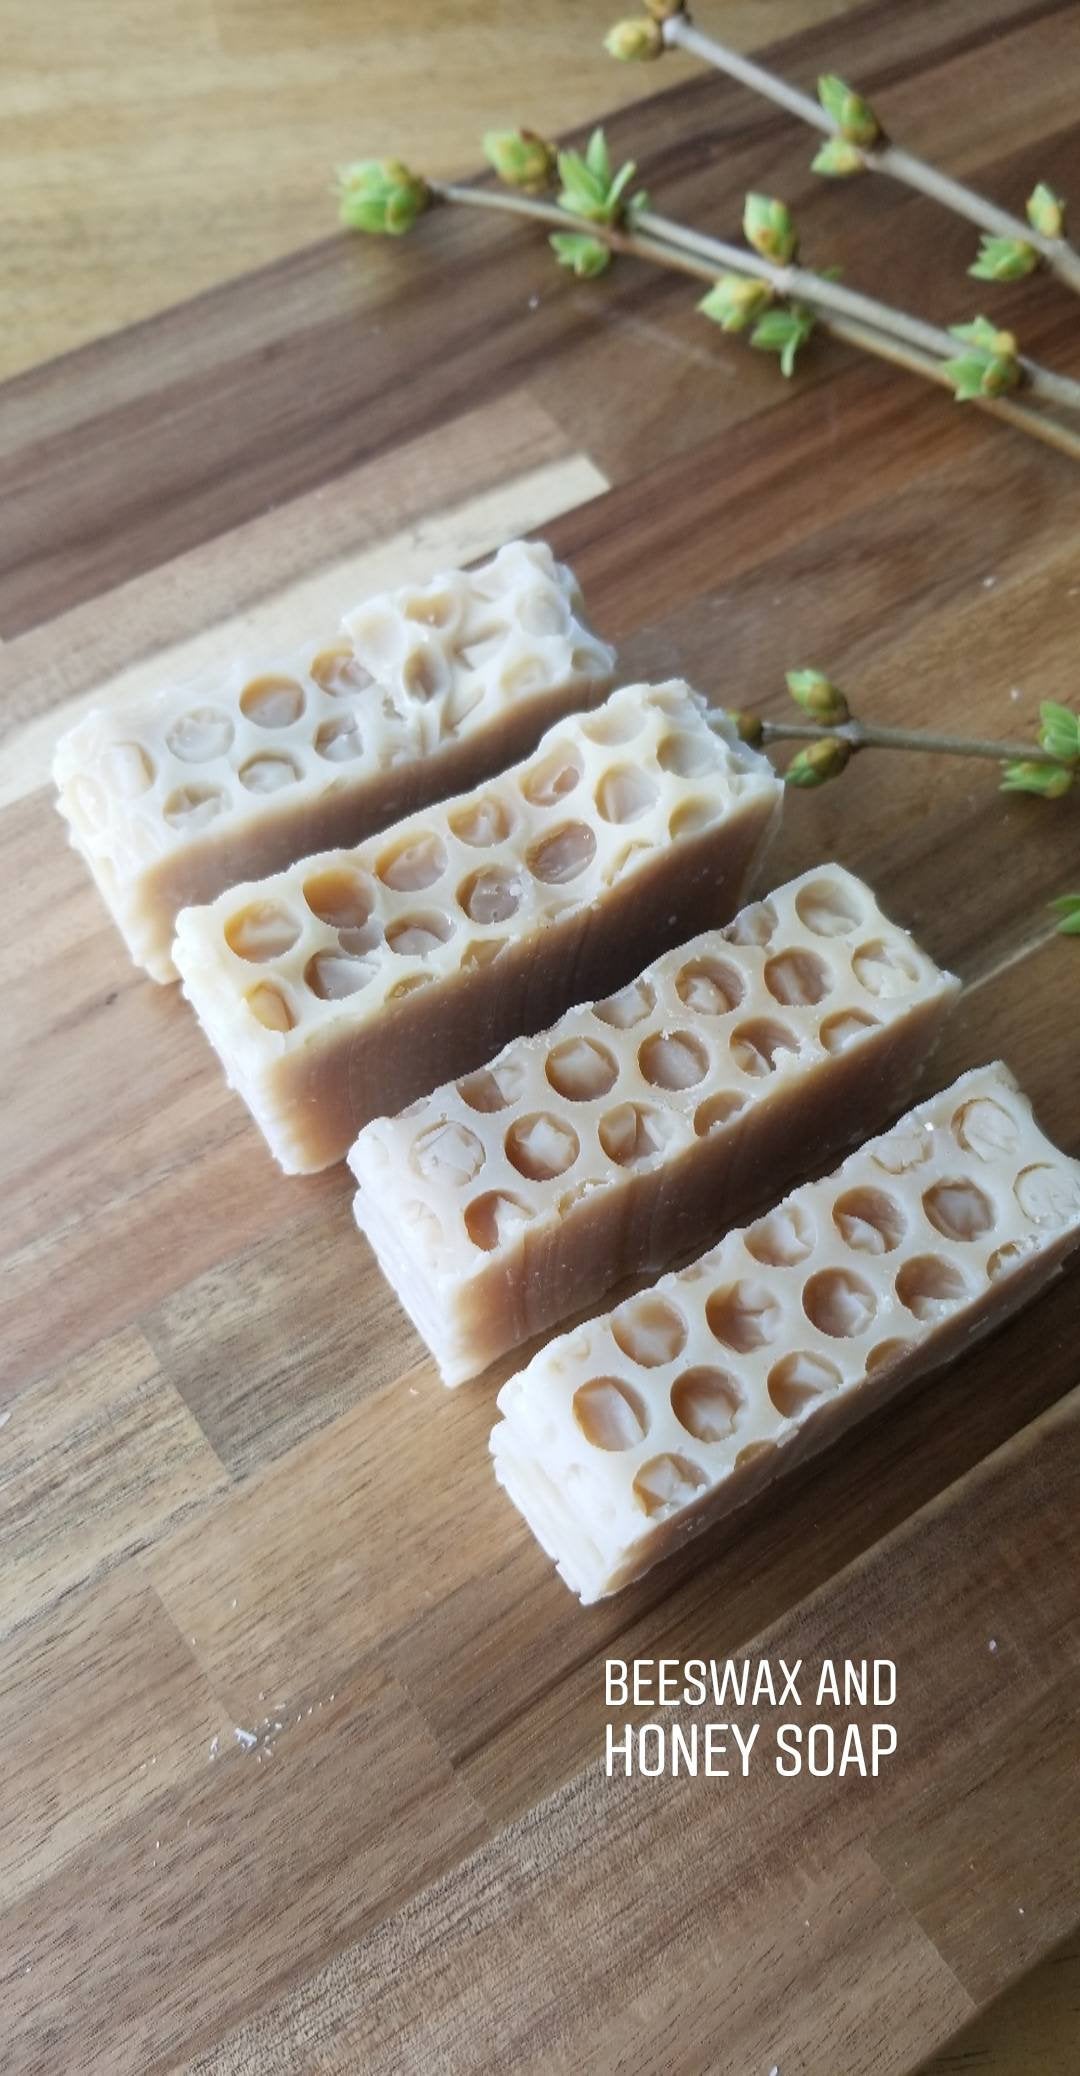 Beeswax and honey cold process soap